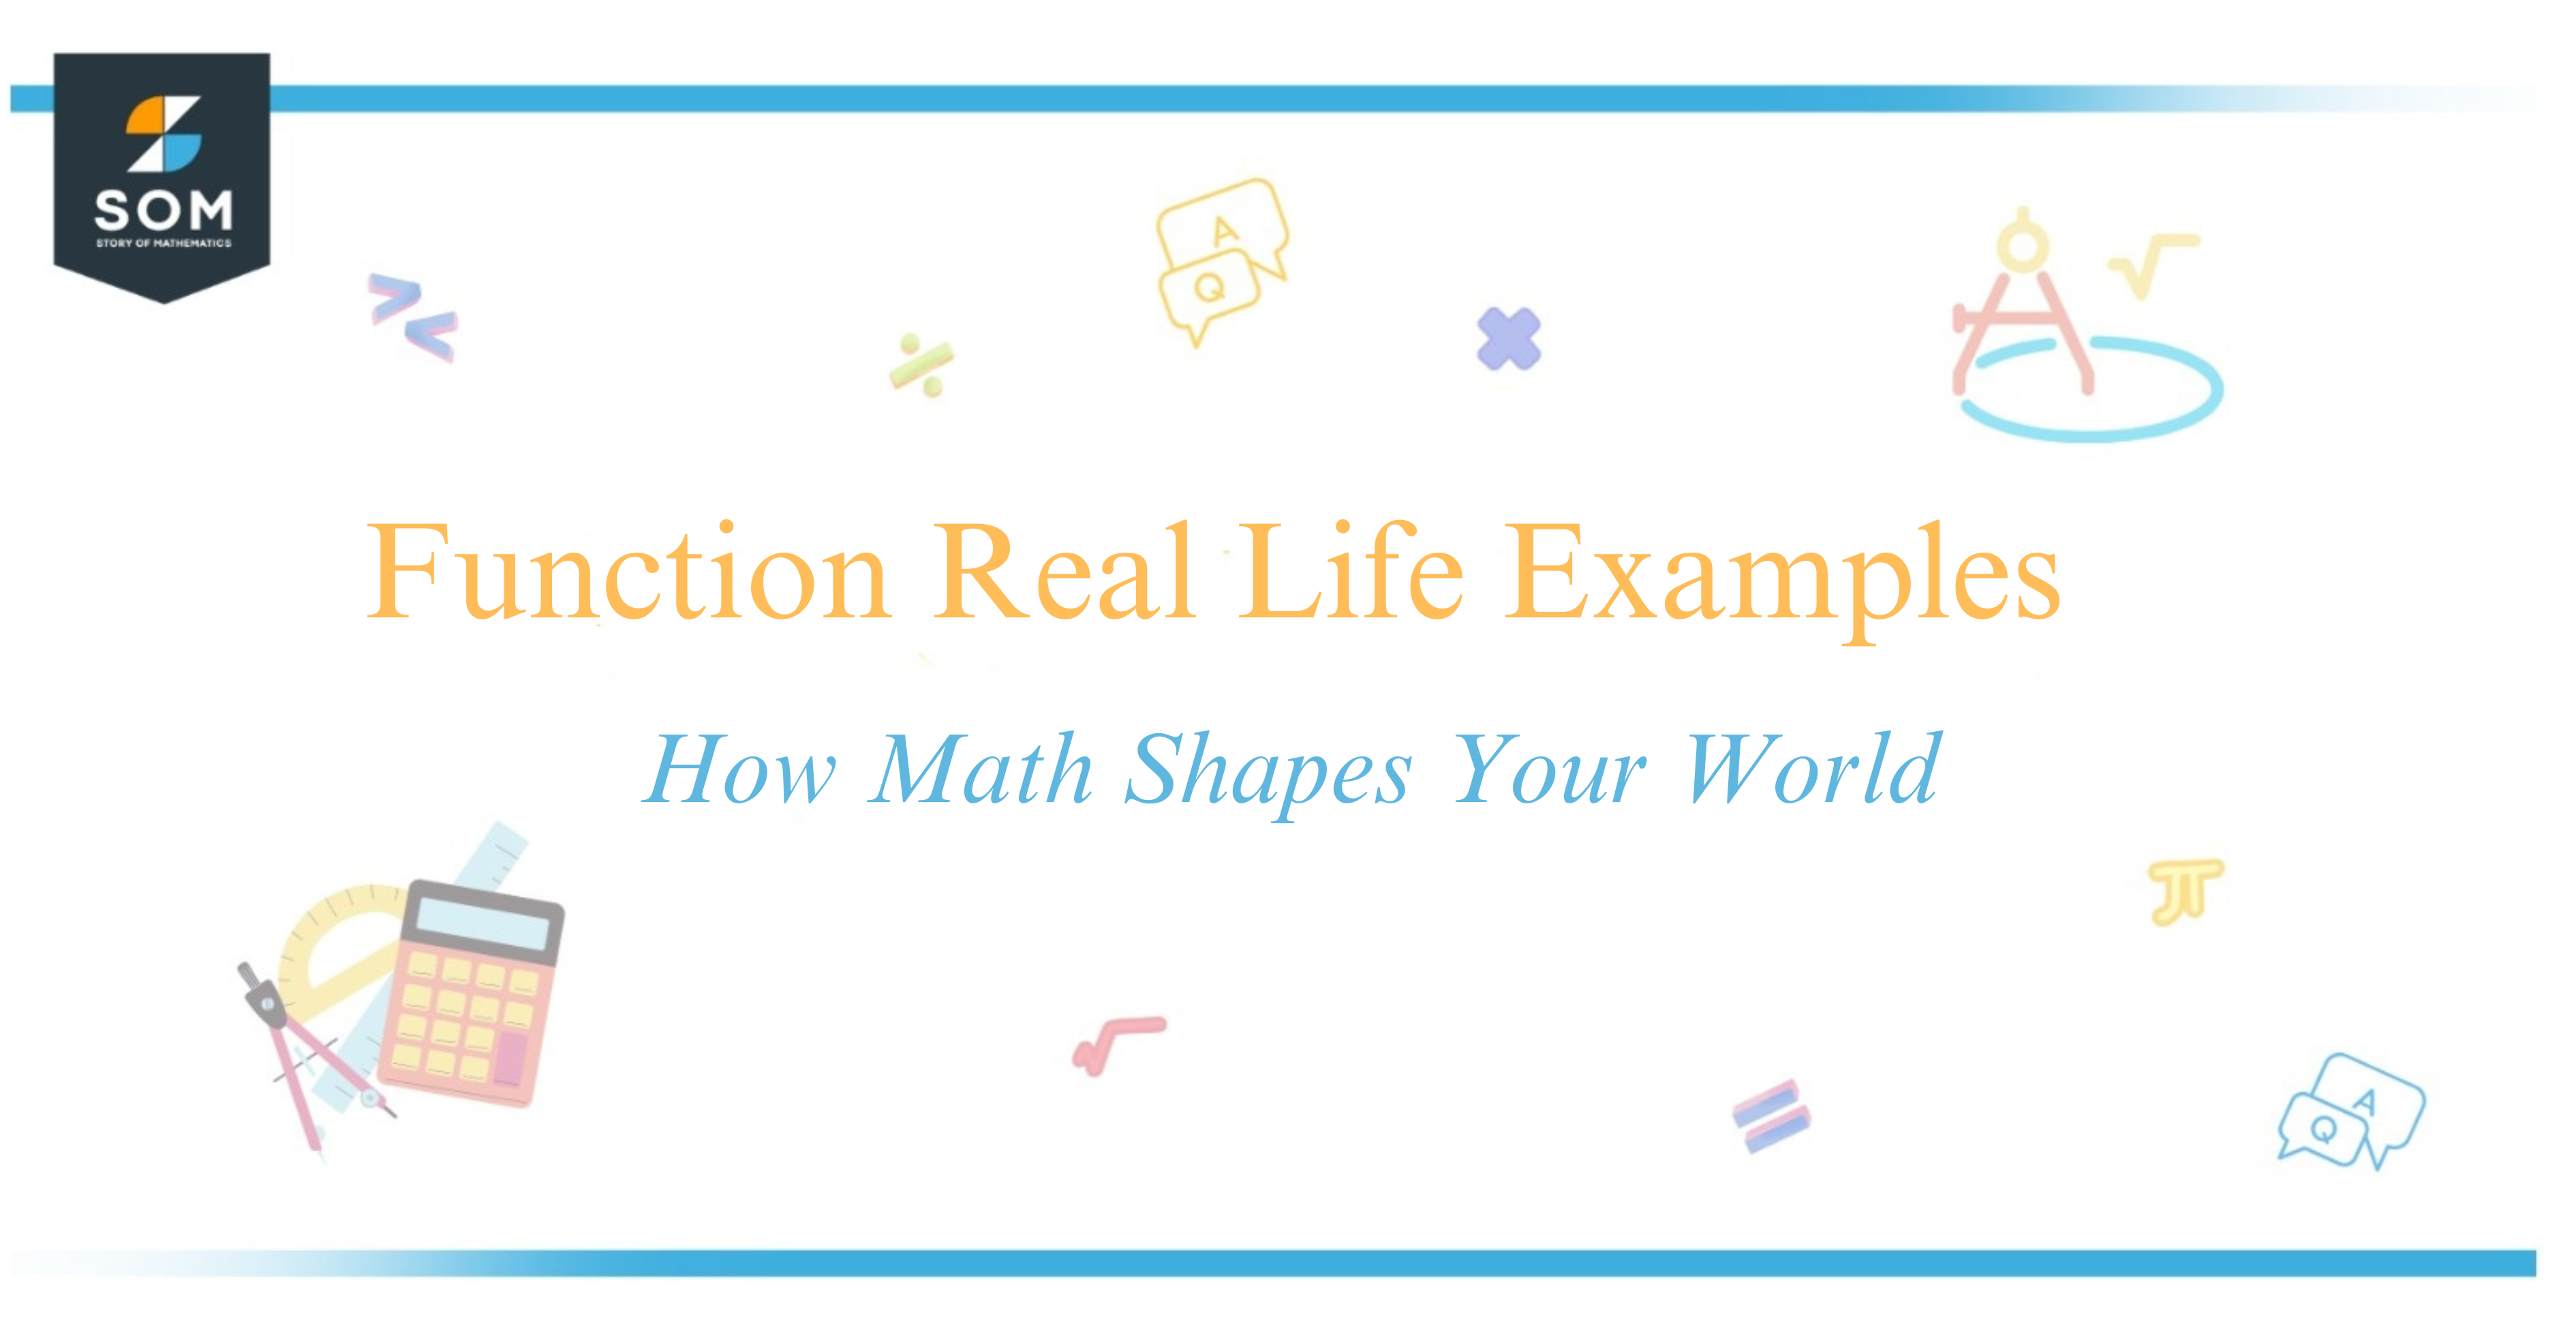 Function Real Life Examples How Math Shapes Your World